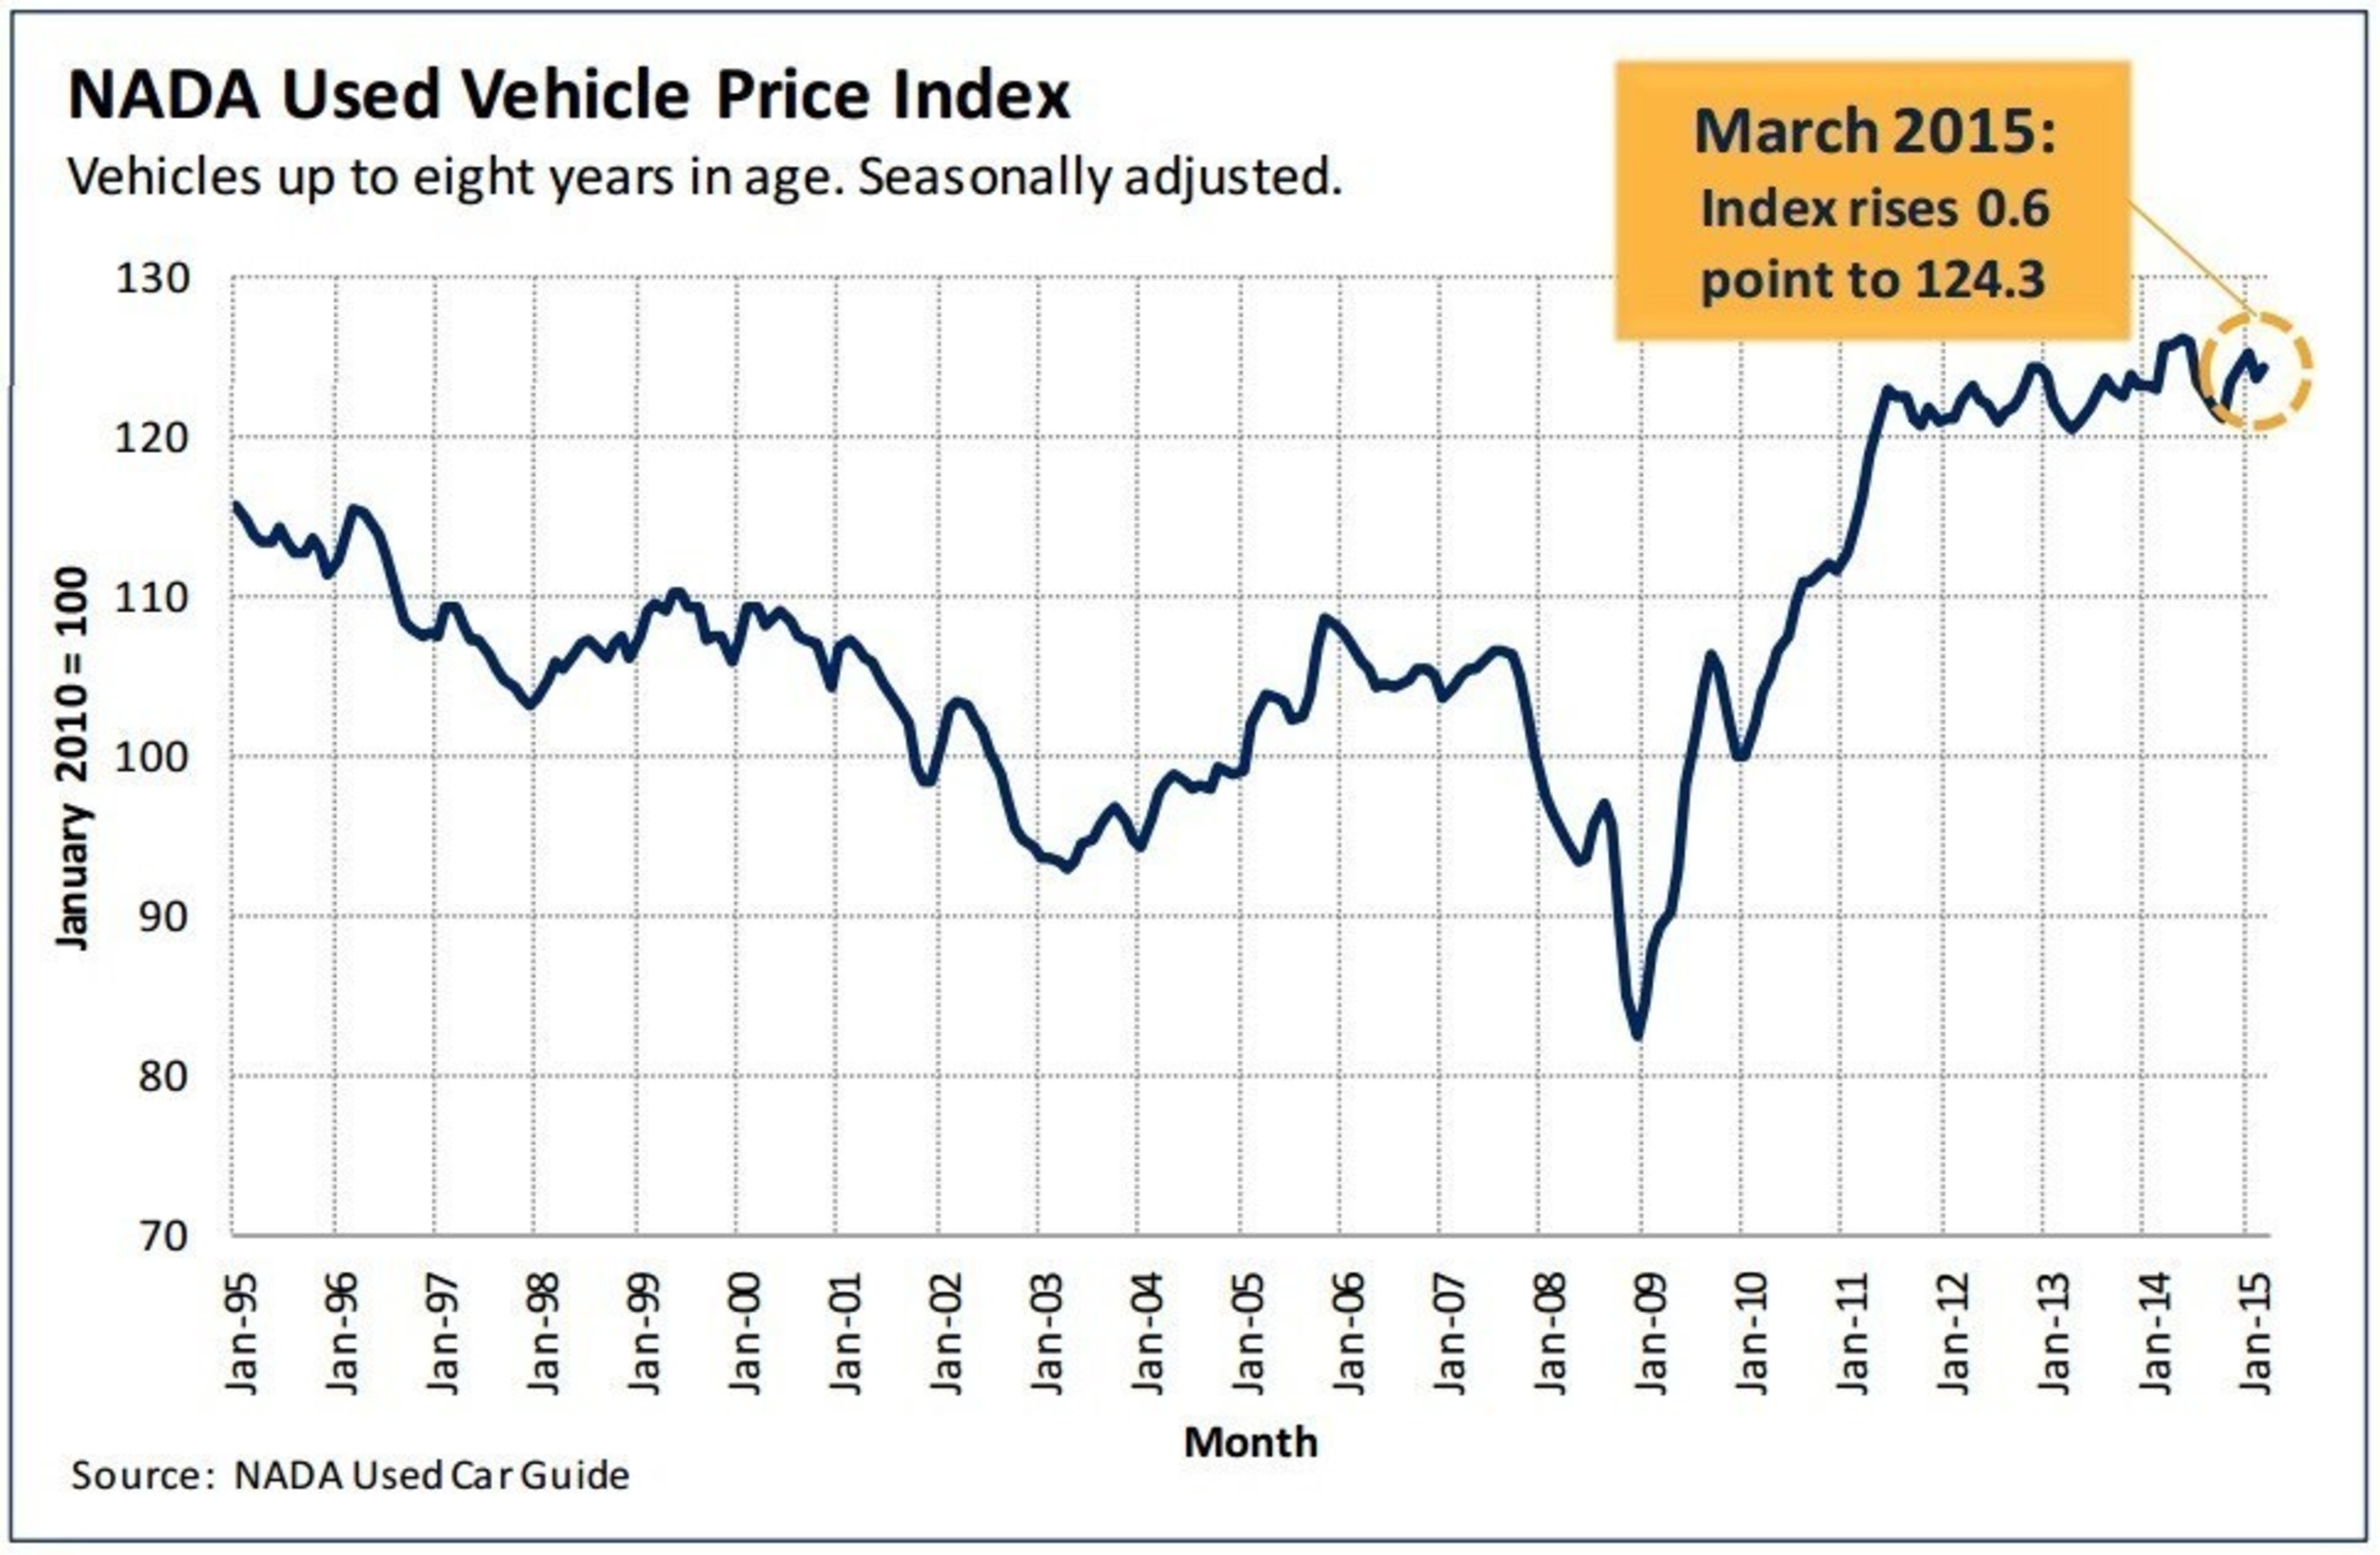 The increase in March prices helped push NADA's Used Vehicle Price Index up from 123.4 in February to 124.3 in March.